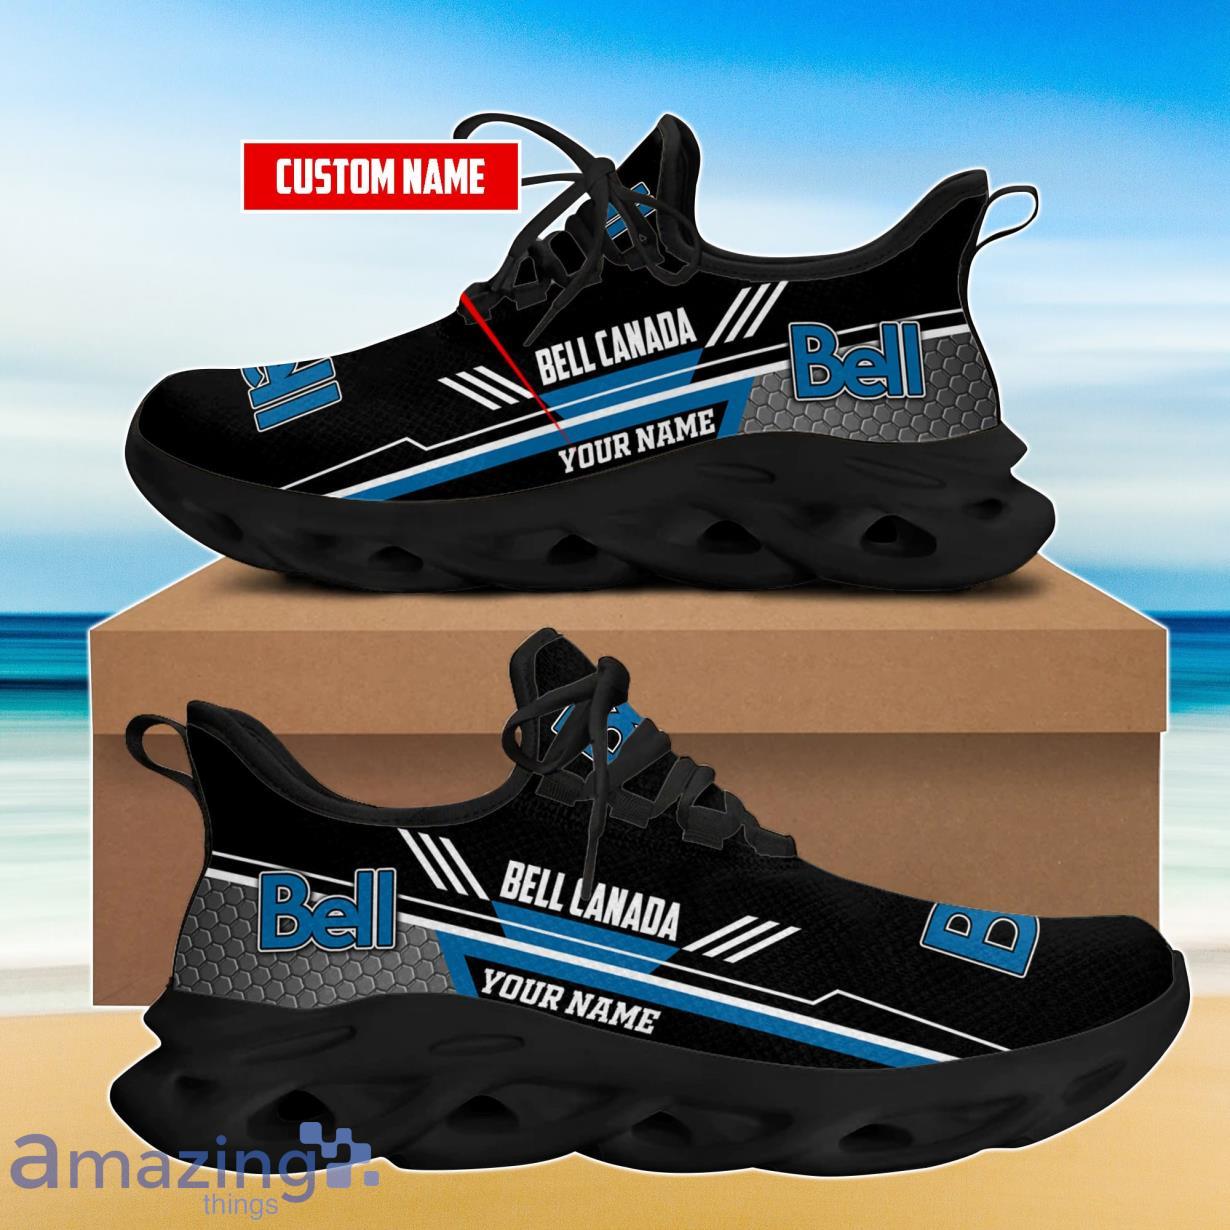 Bell Canada Max Soul Shoes Custom Name Product Photo 1